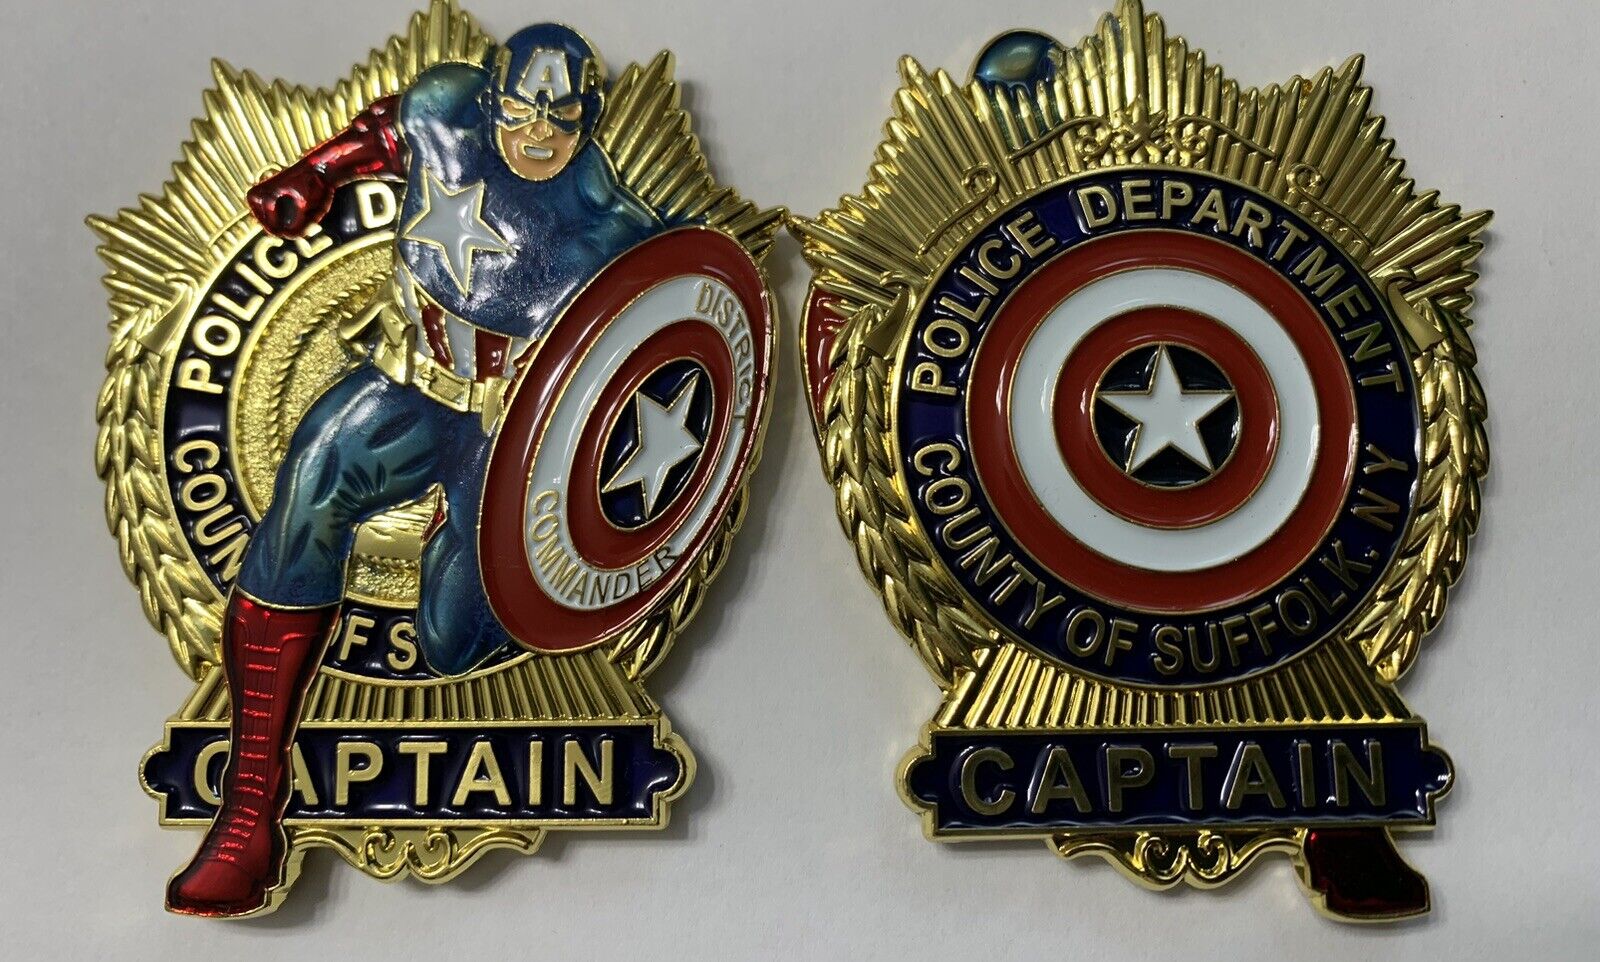 SUFFOLK COUNTY POLICE CAPTAIN AMERICA CAPT SCPD SHIELD CHALLENGE COIN NEW YORK